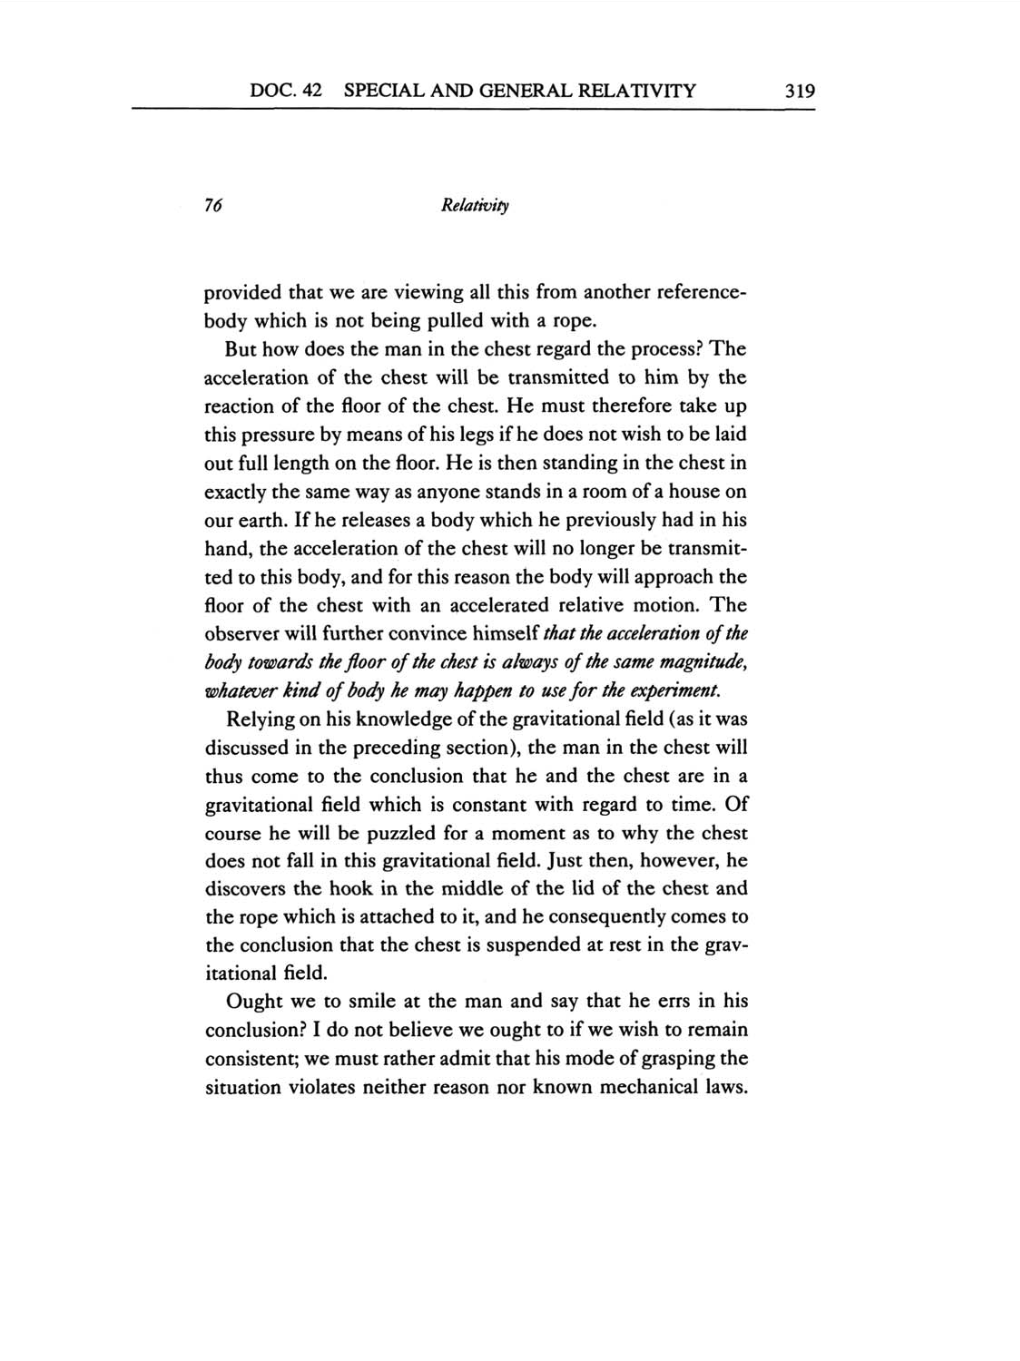 Volume 6: The Berlin Years: Writings, 1914-1917 (English translation supplement) page 319